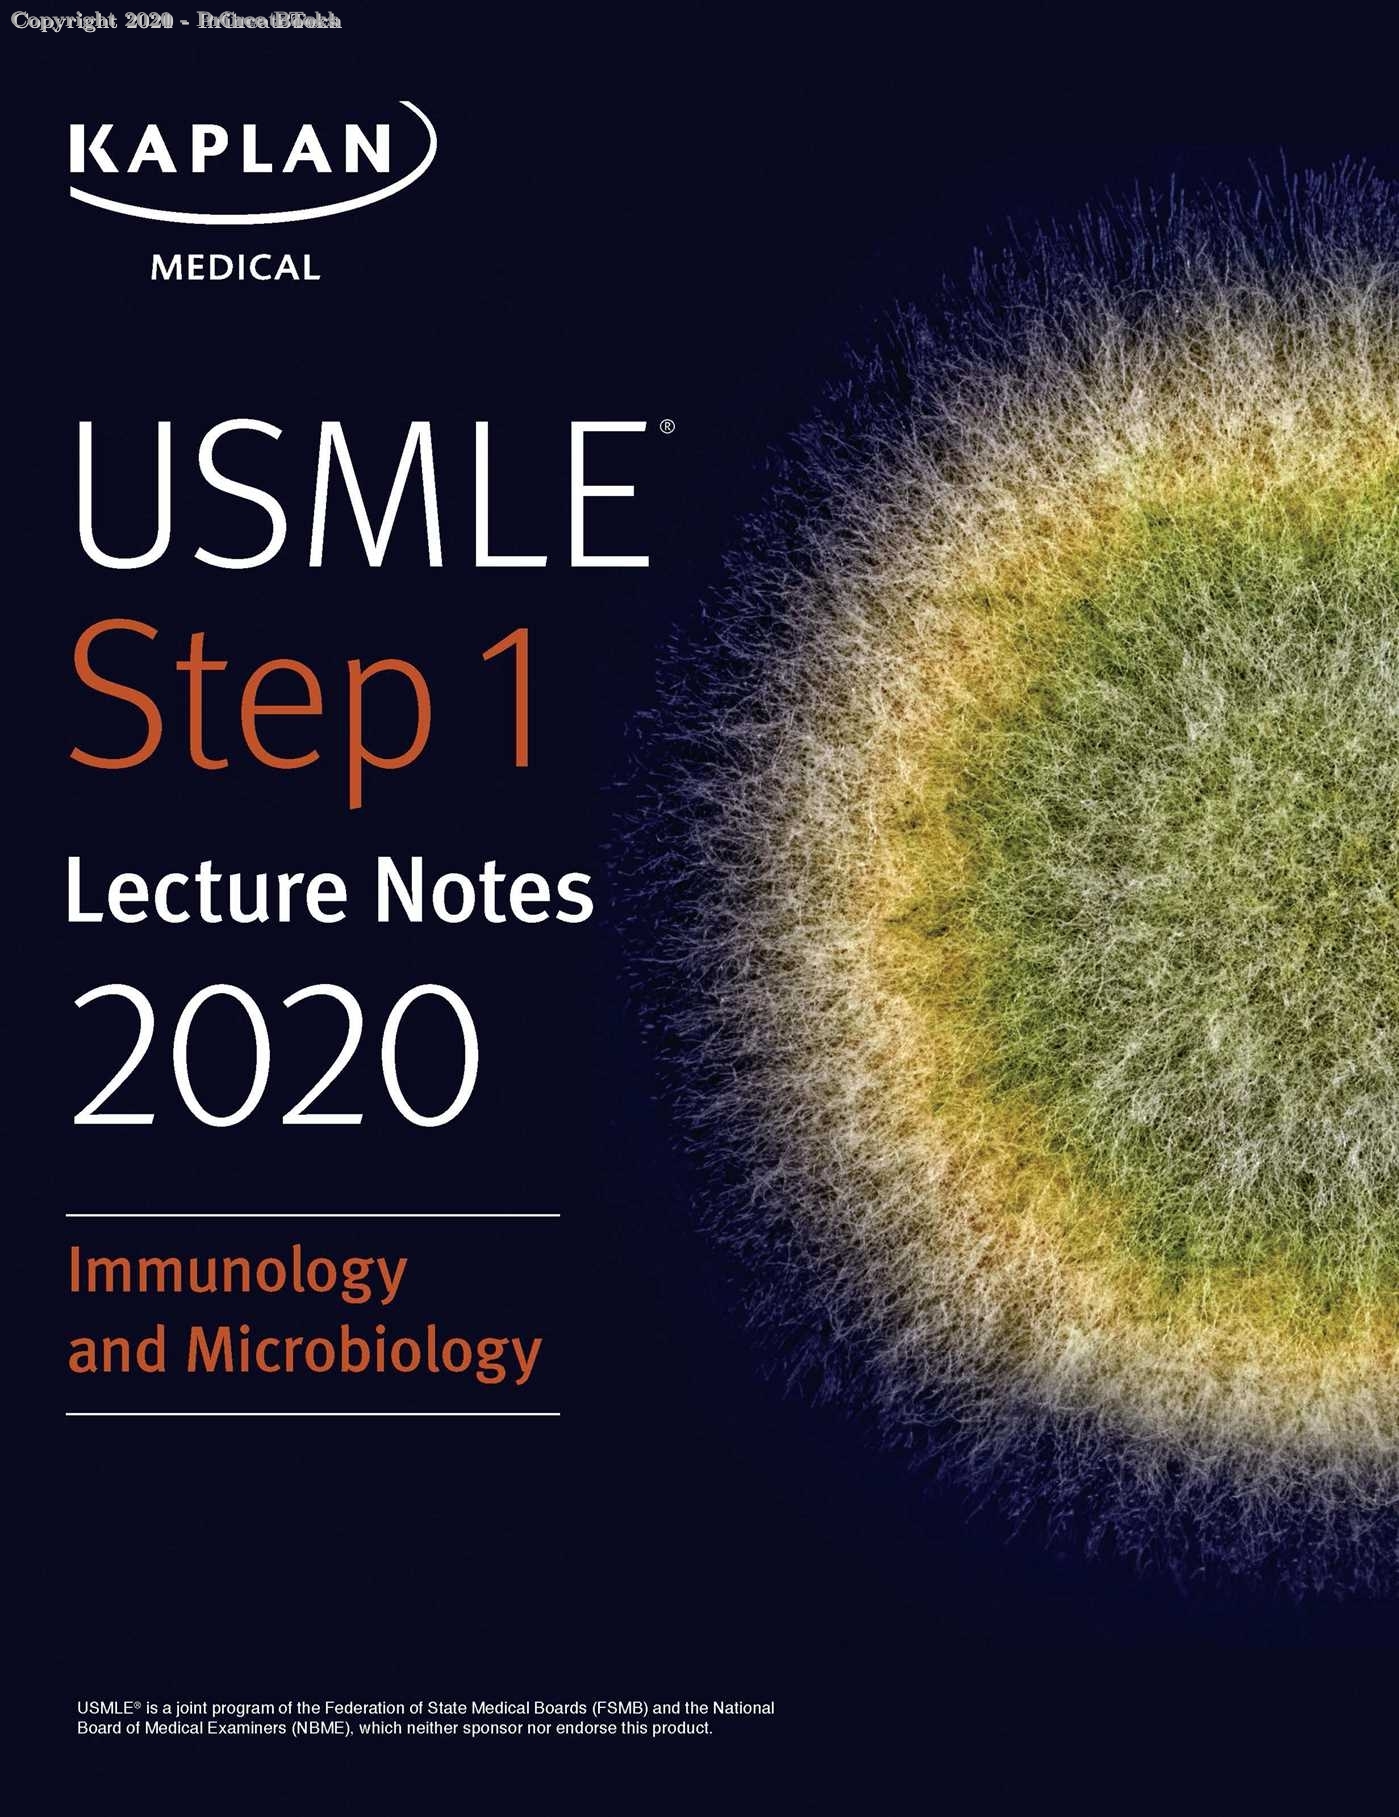 kaplan USMLE Step 1 Lecture Notes Immunology and Microbiology